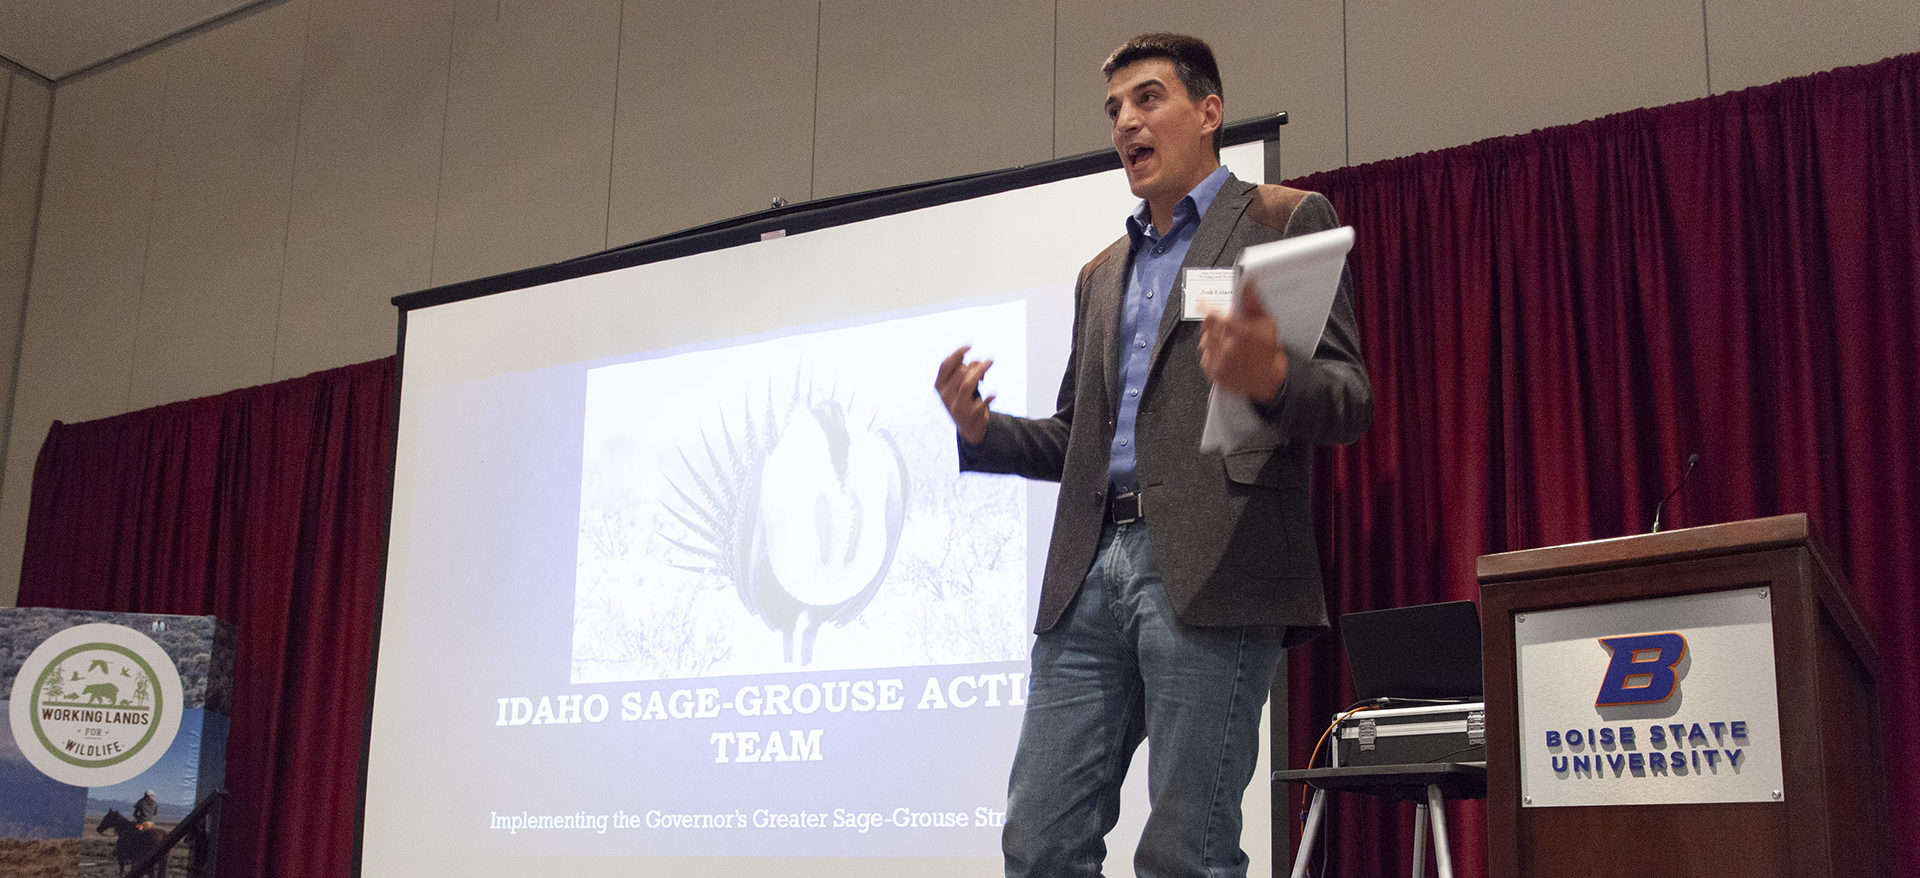 Josh Uriarte with Idaho Governor’s Office of Species Conservation shares details on Idaho’s Sage Grouse Action Team’s cooperative range land conservation efforts.